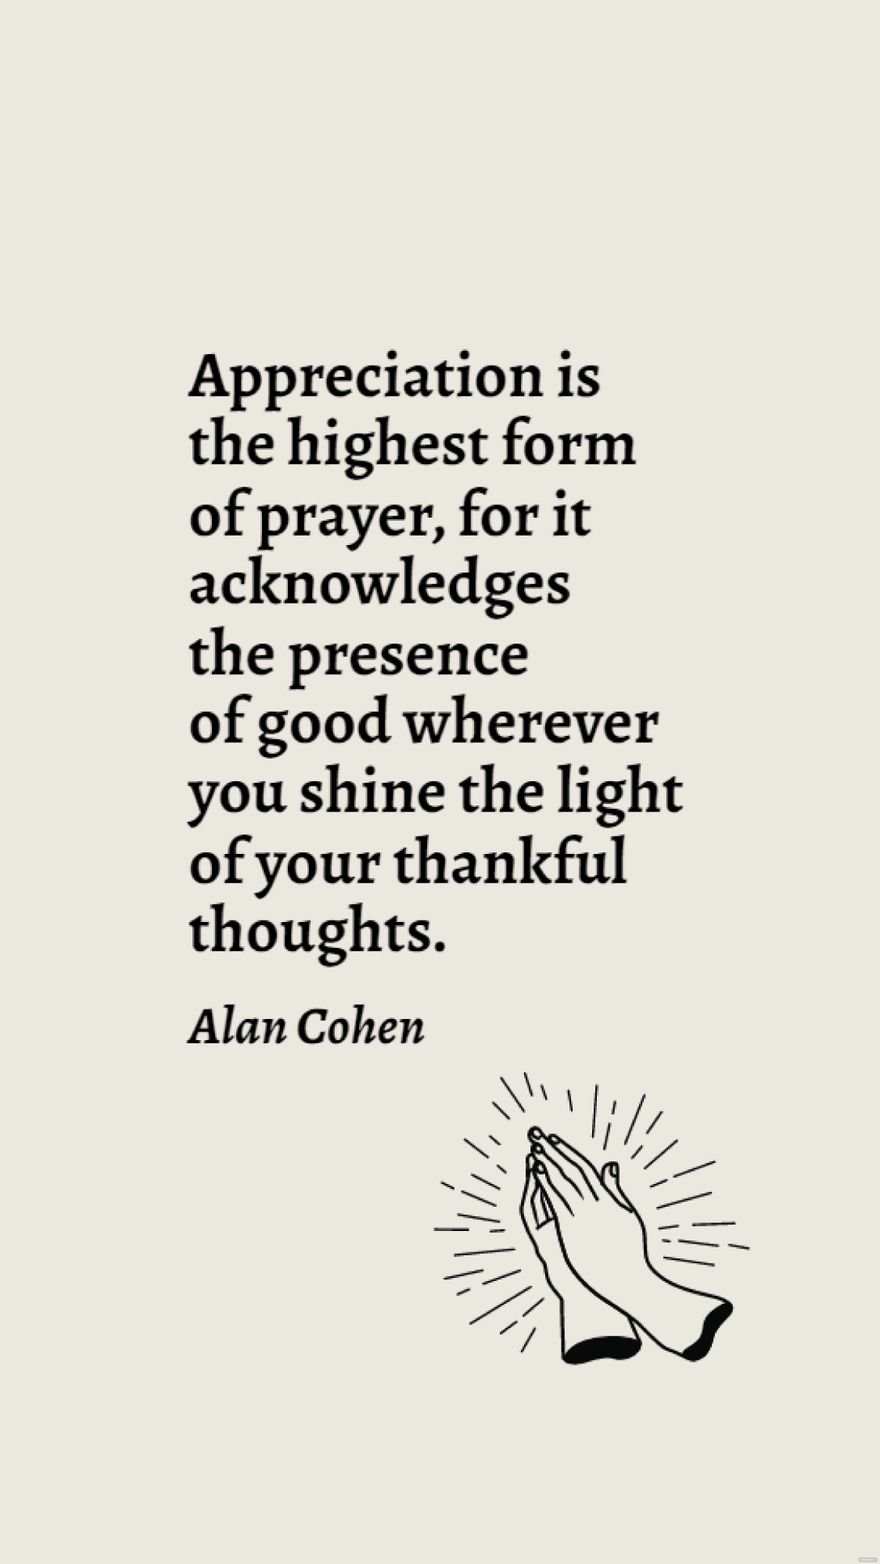 Alan Cohen - Appreciation is the highest form of prayer, for it acknowledges the presence of good wherever you shine the light of your thankful thoughts.